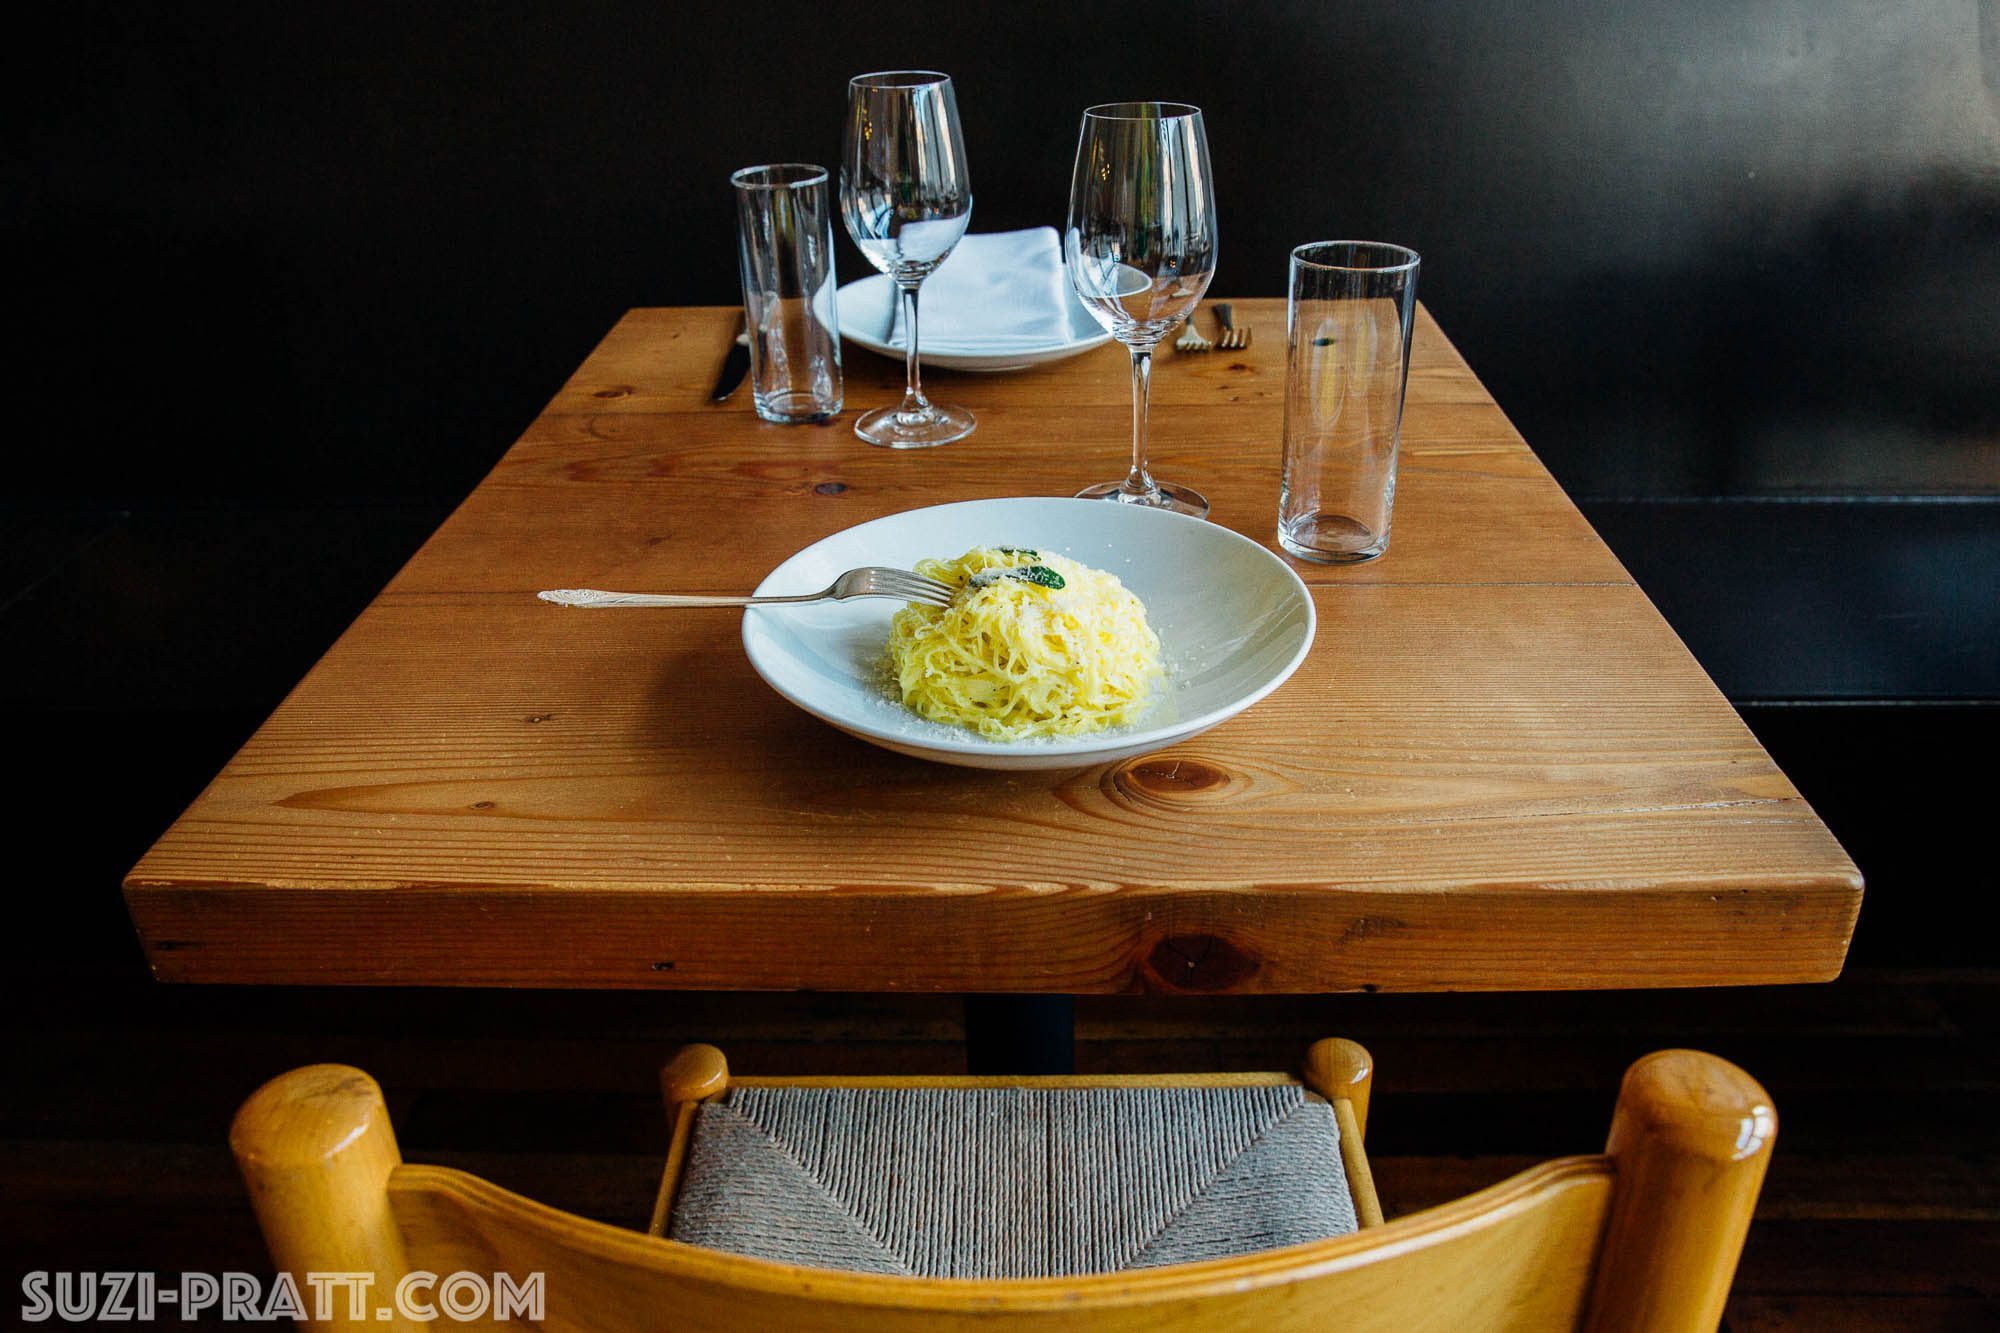 Spinasse Seattle food photographer